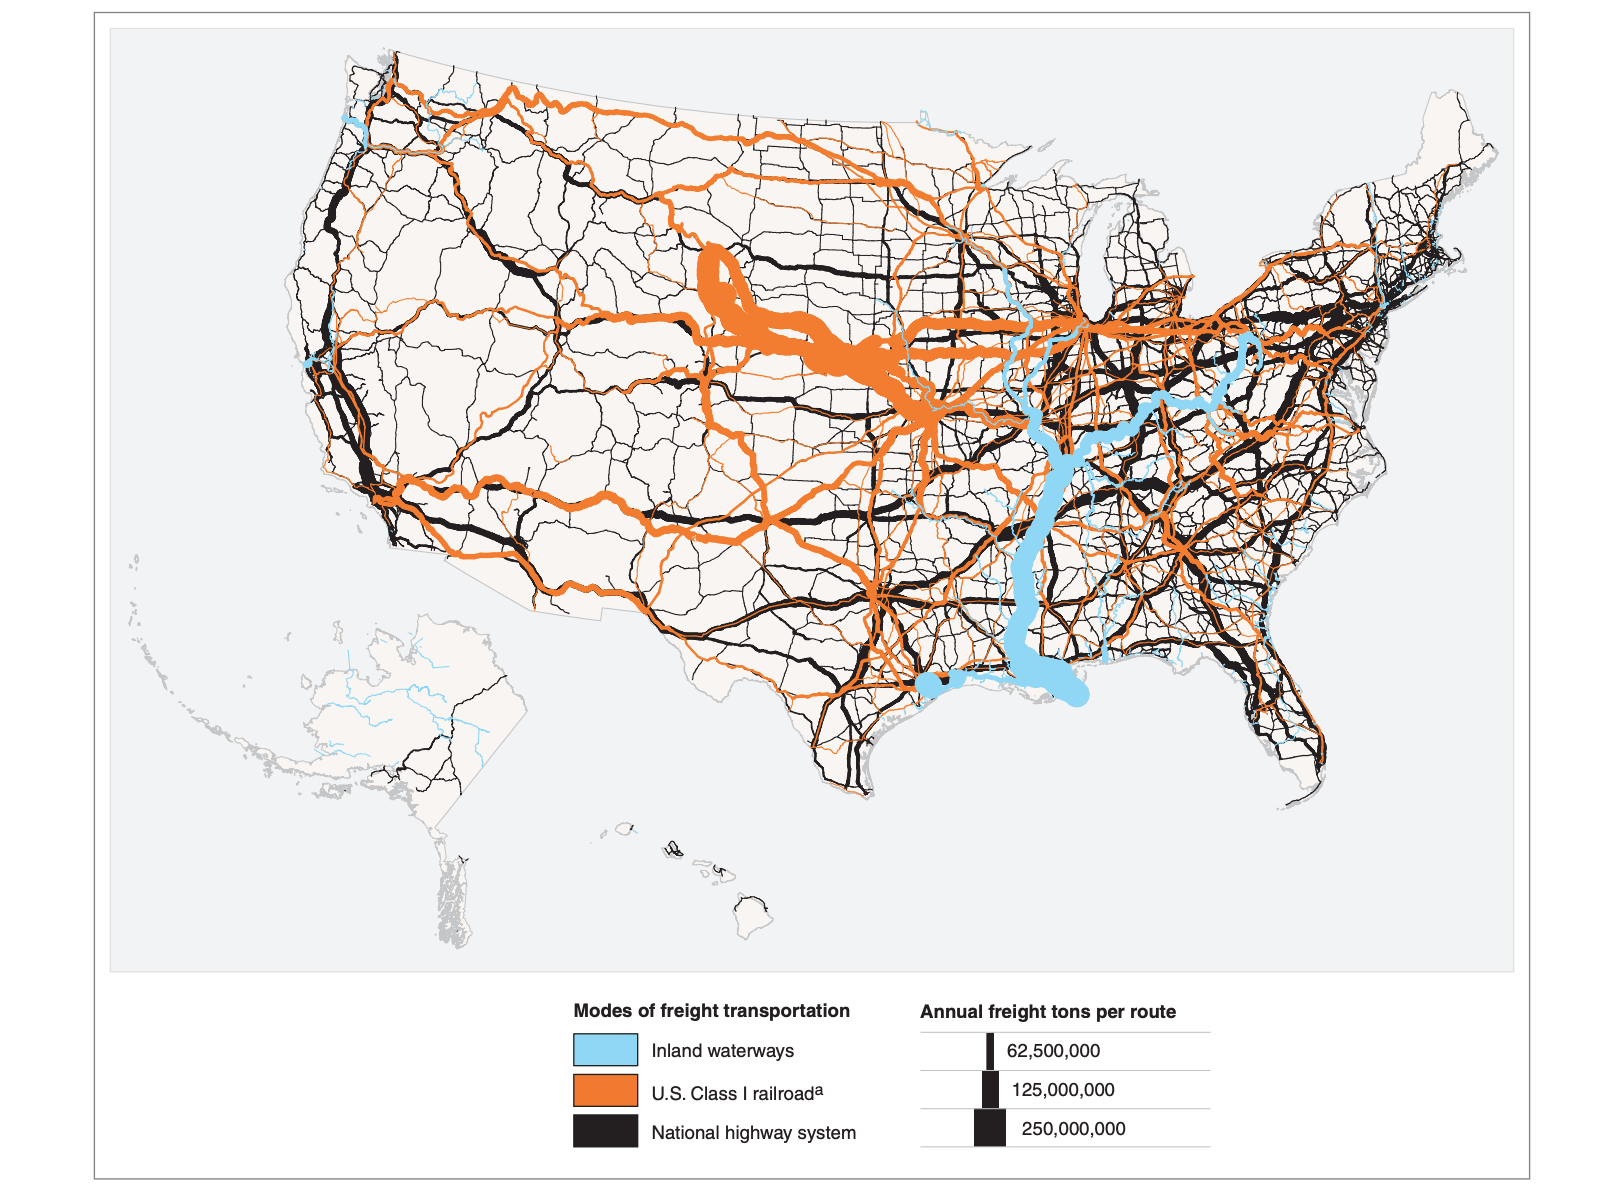 Union Pacific And Csx Transportation In The Competitive Landscape Of